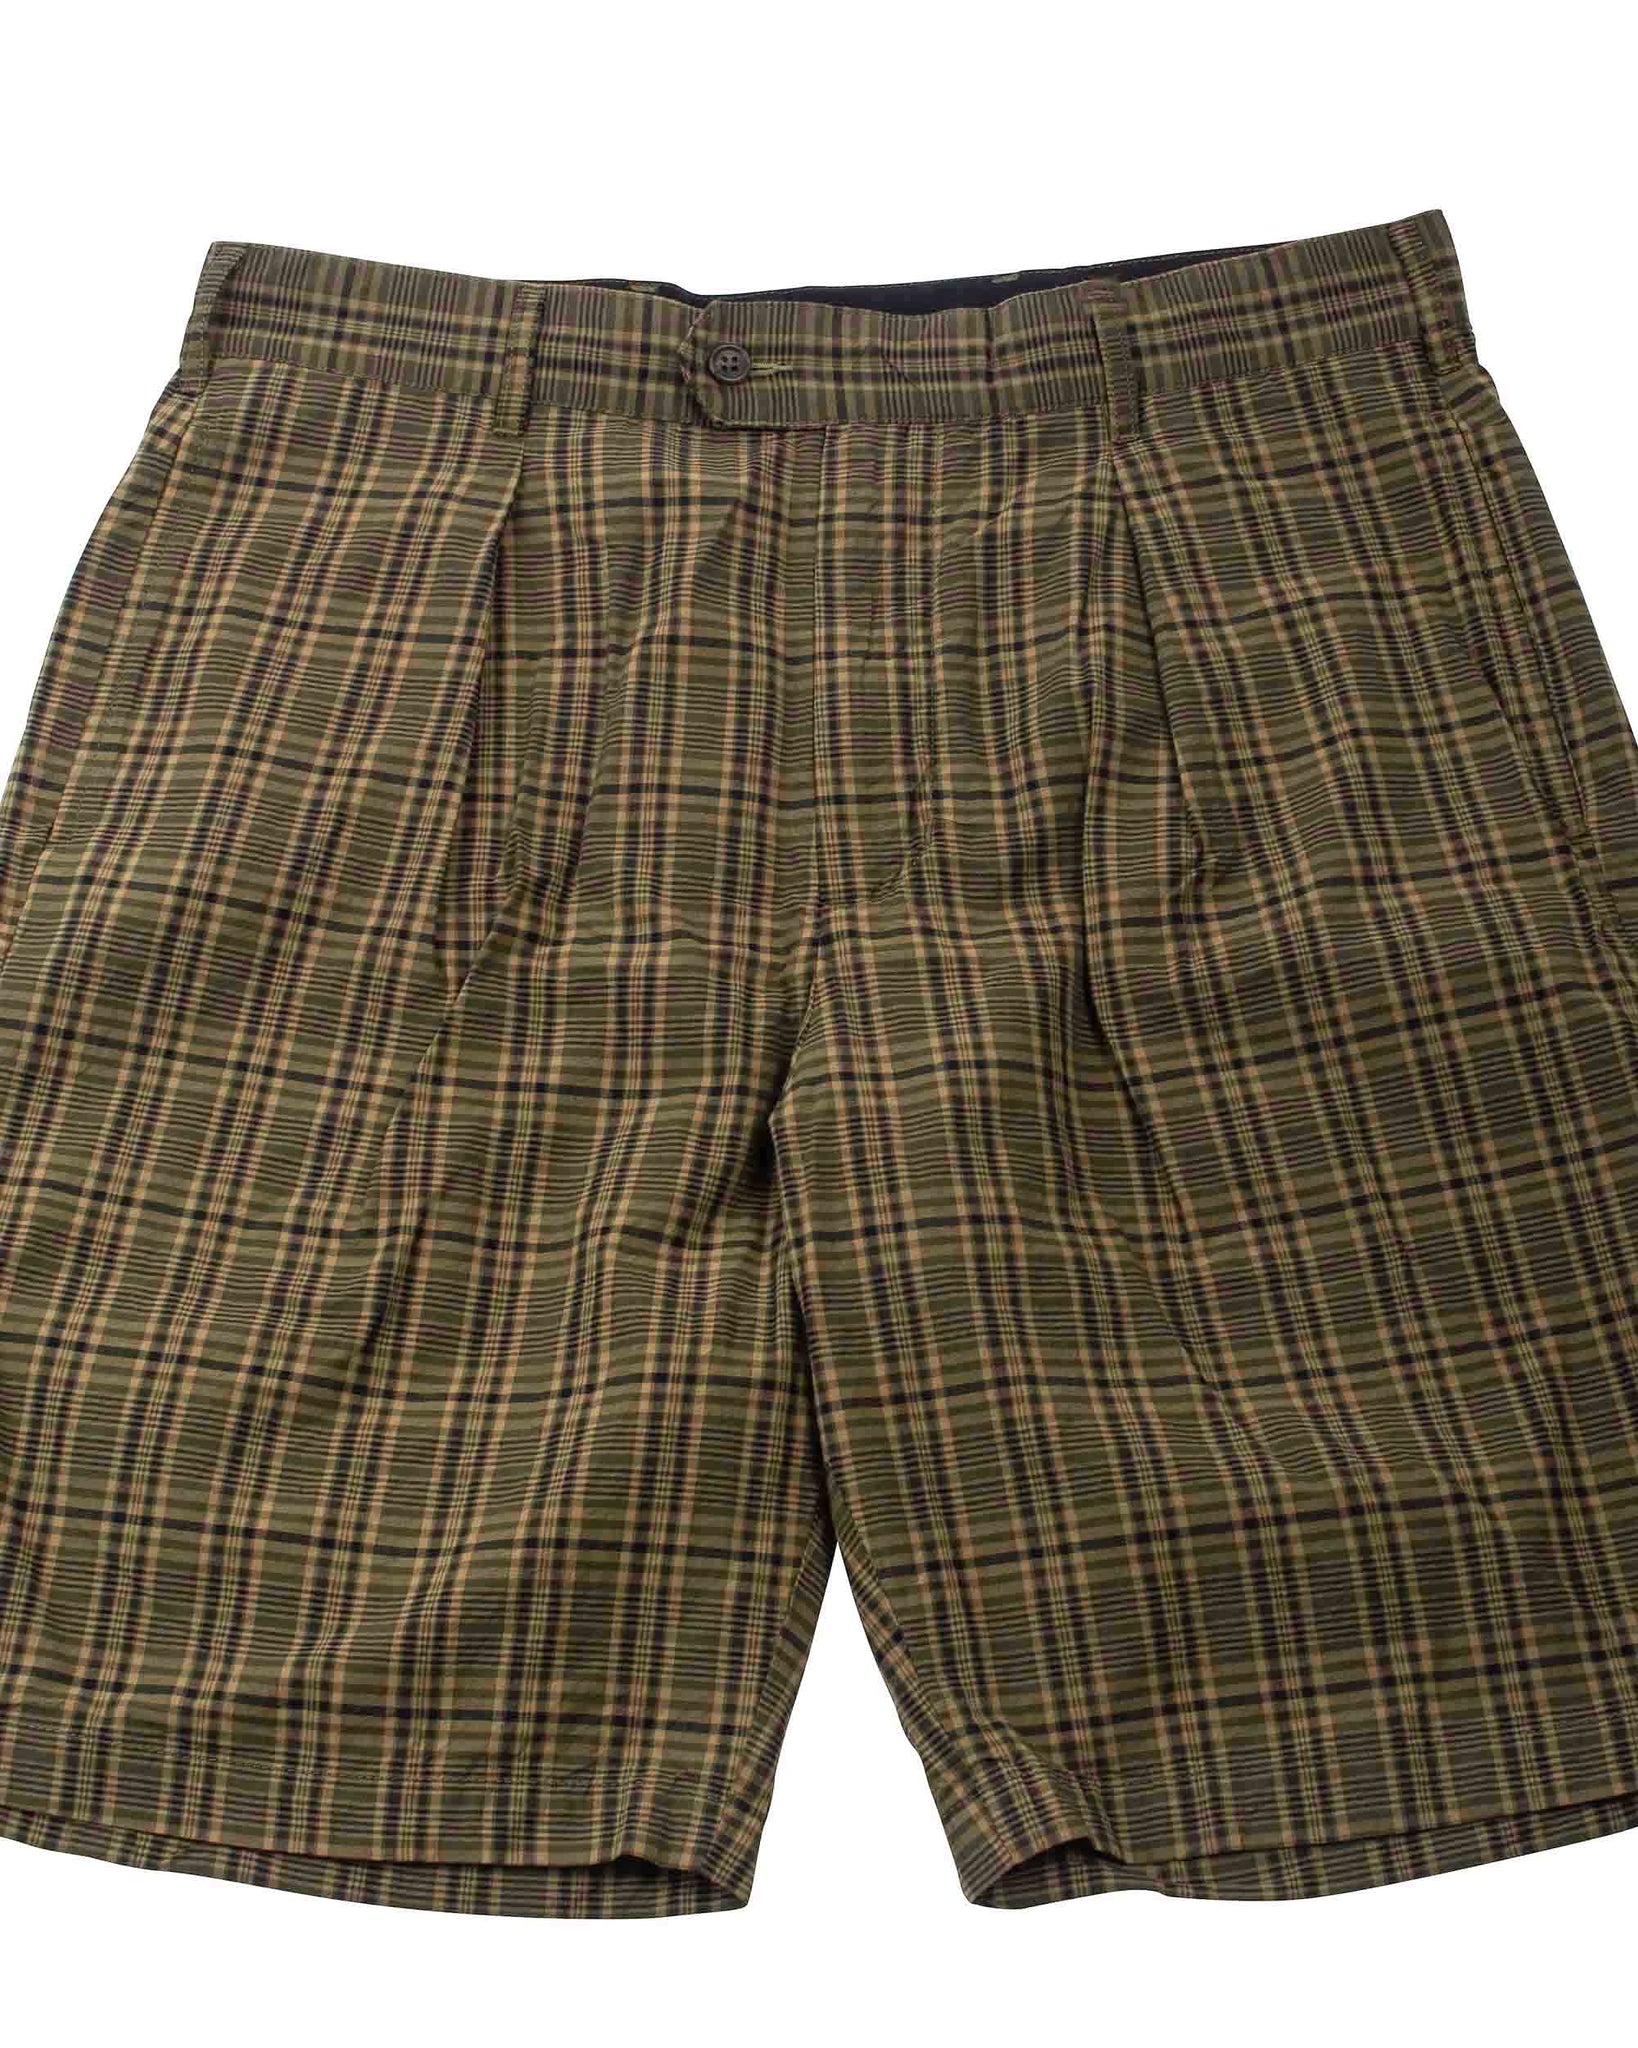 Engineered Garments Sunset Short Olive Brown Cotton Madras Check